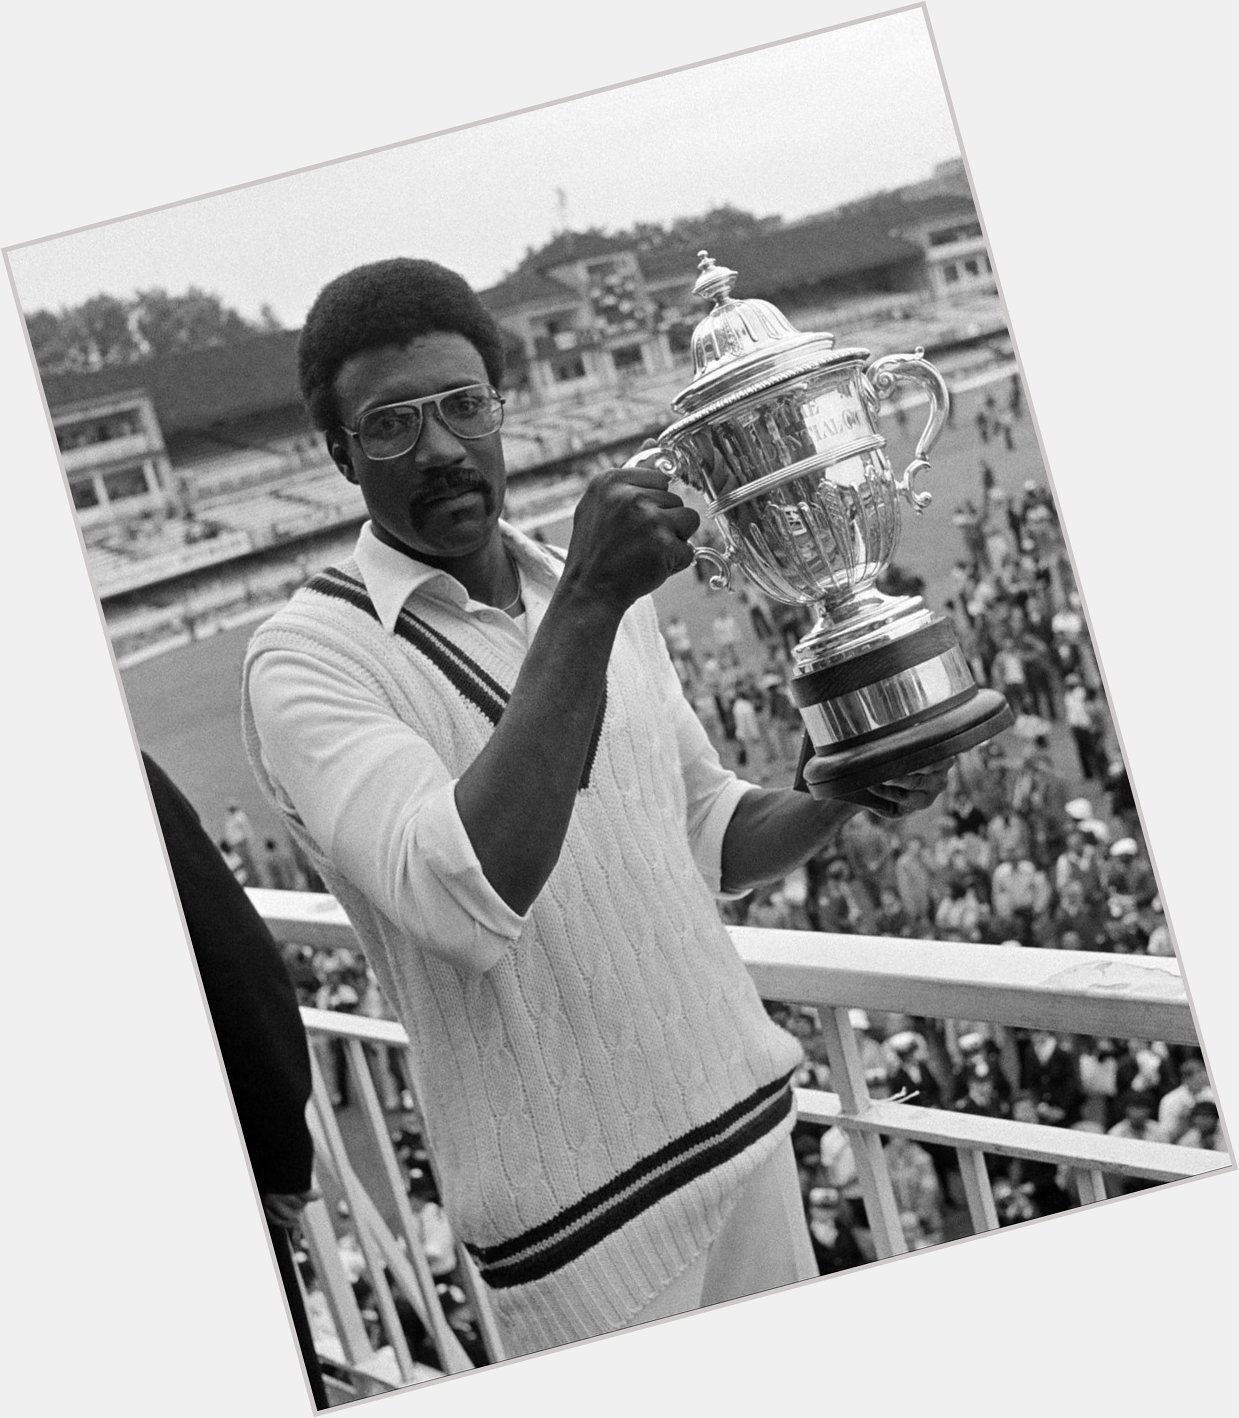 7515 Test runs at an ave of 46
1977 ODI runs at an ave of 39

Happy Bday to d 75 ad 79 WC winning captain,Clive Lloyd 